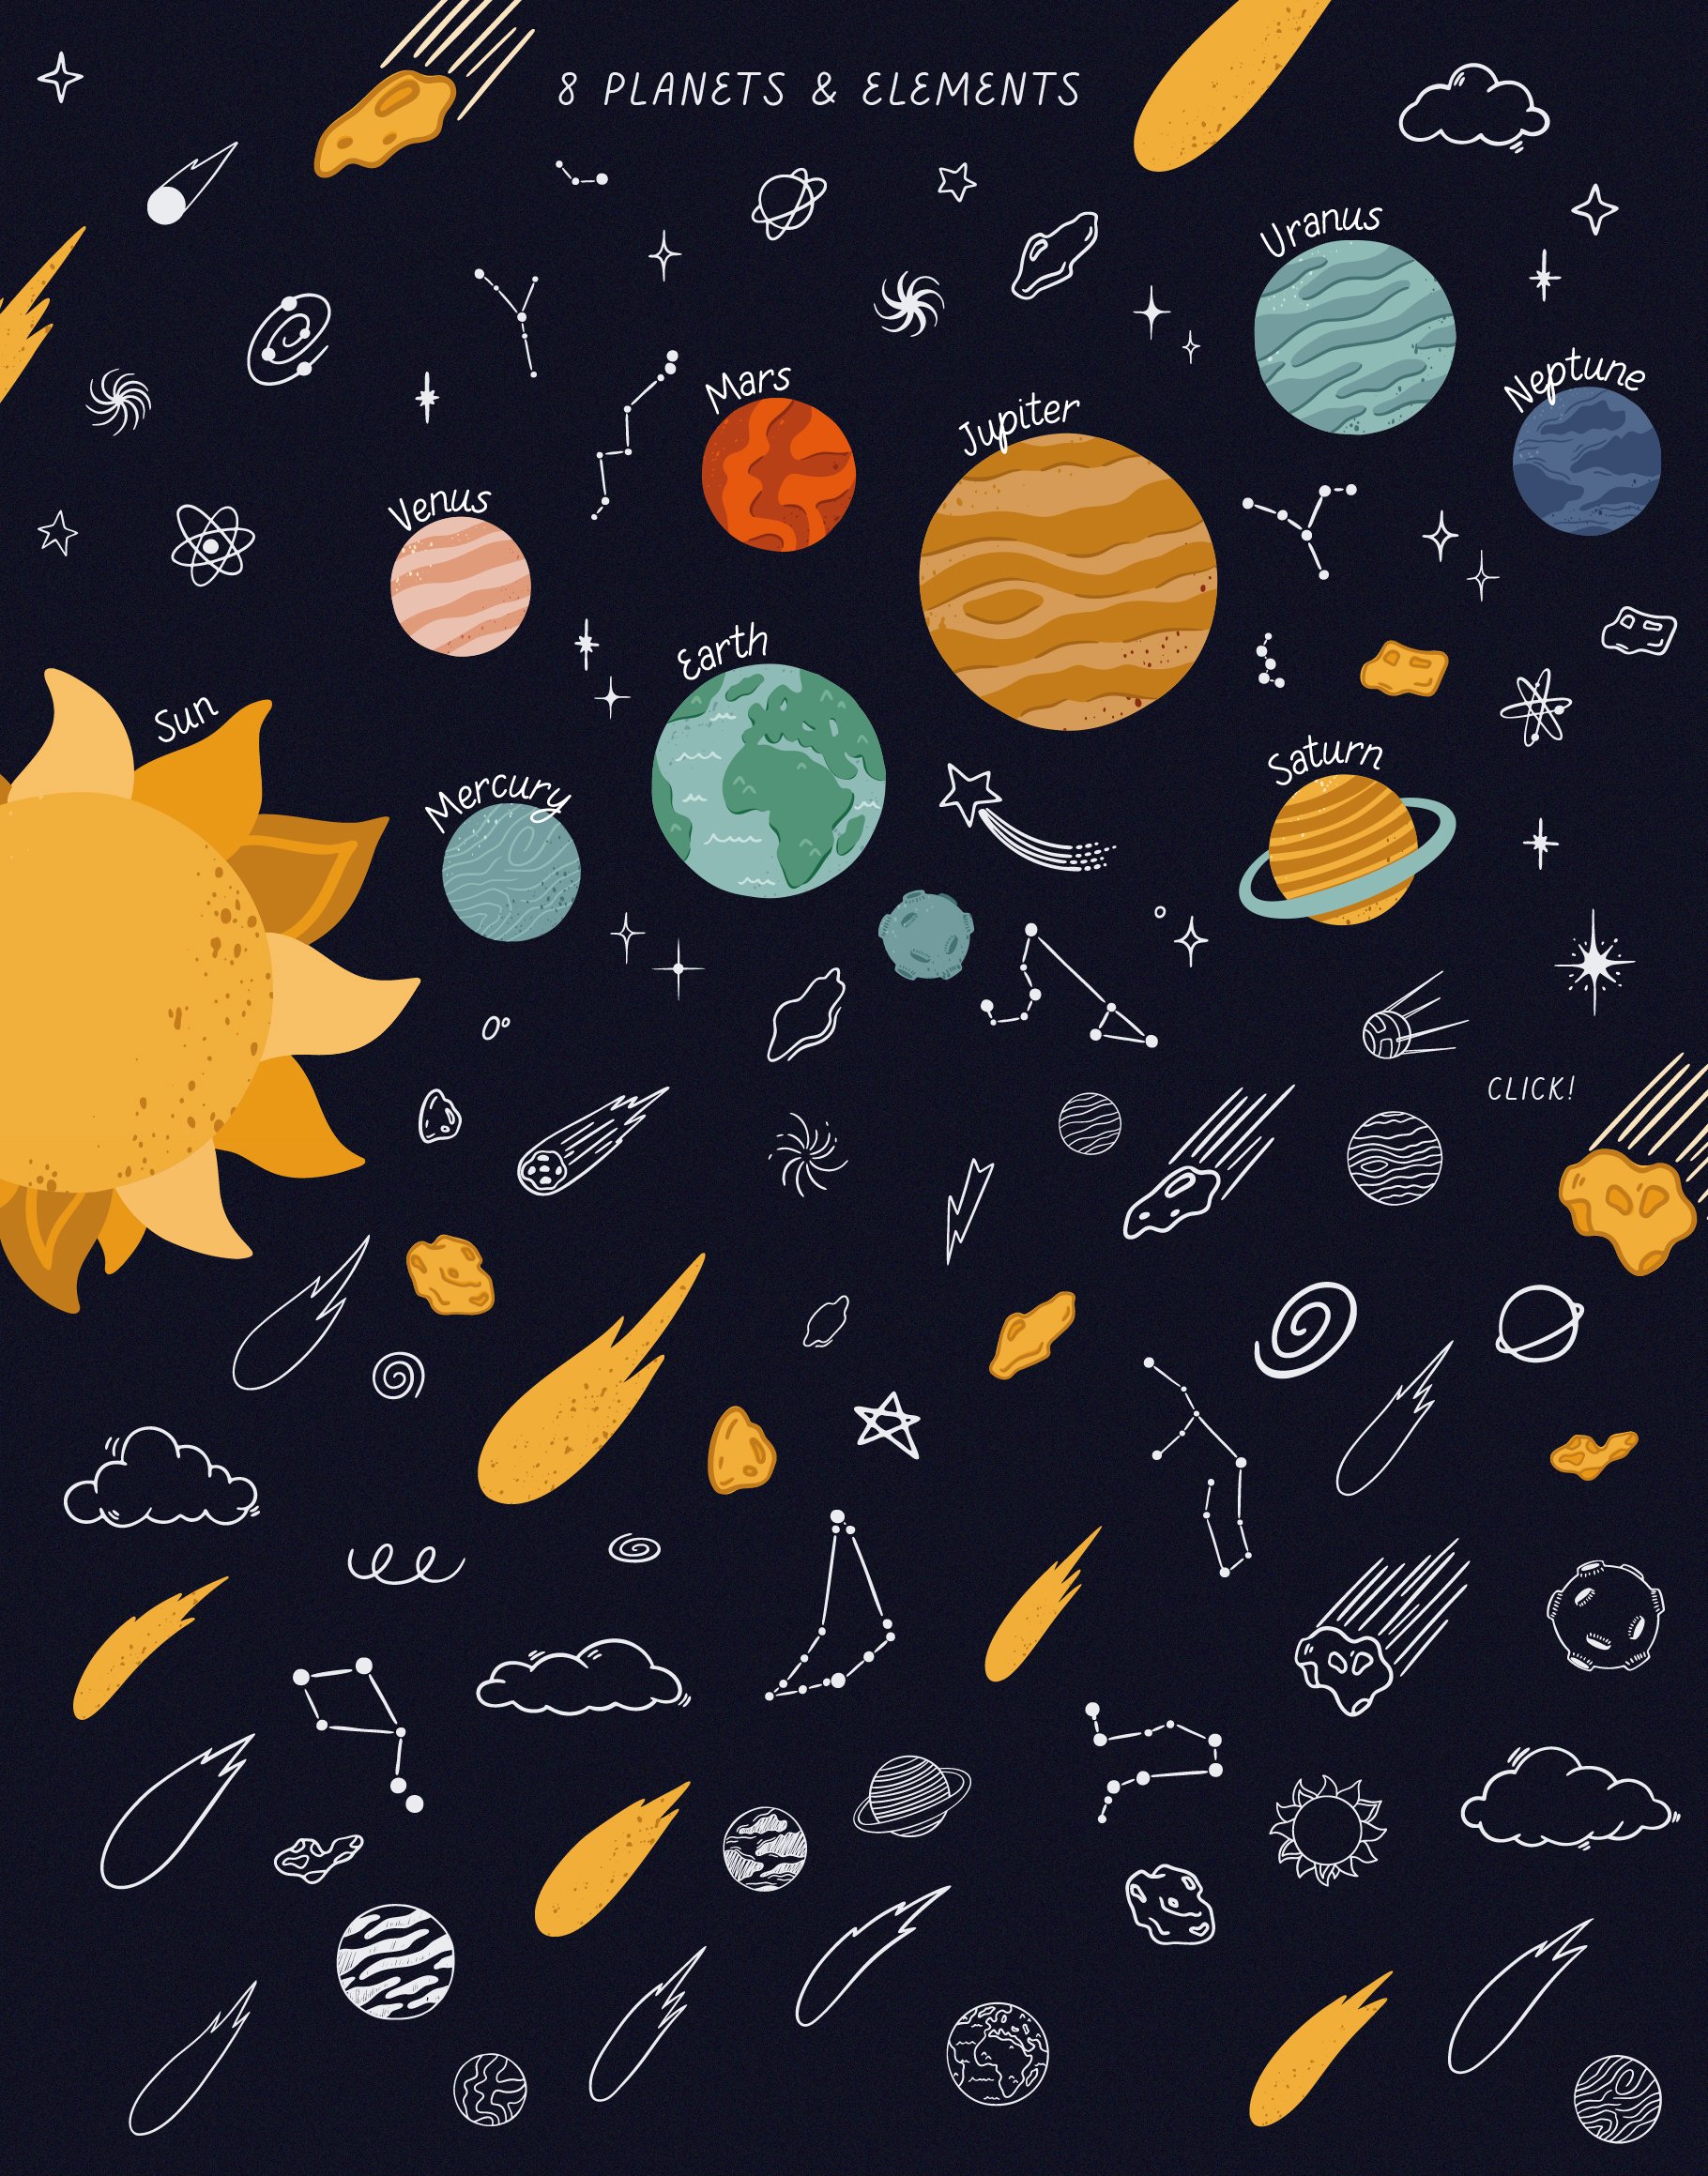 COSMIC solar system + SVG files preview image.